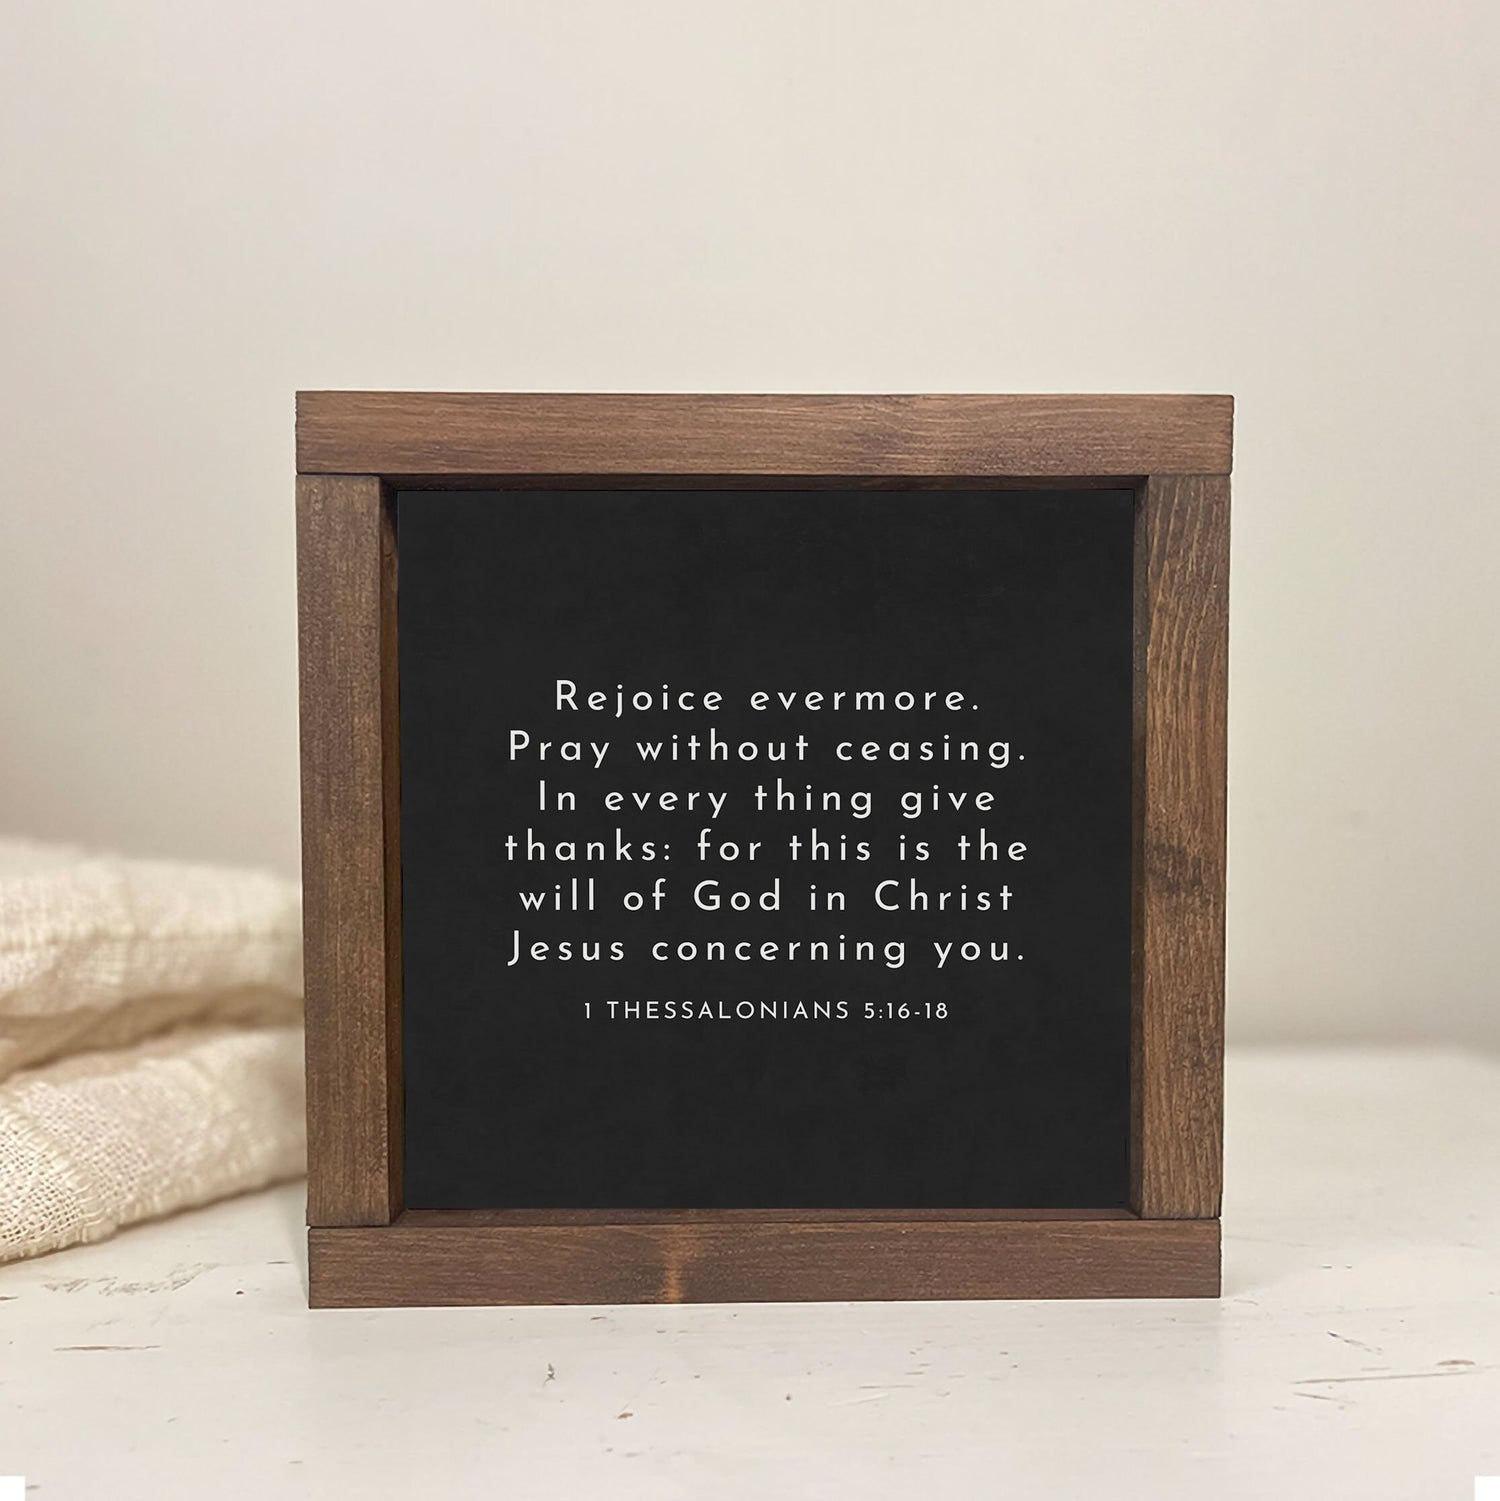 Rejoice evermore, pray without ceasing, in everything give thanks 1 Thessalonians 5:16-18, Christian Scripture Wood Sign, Scripture Gift